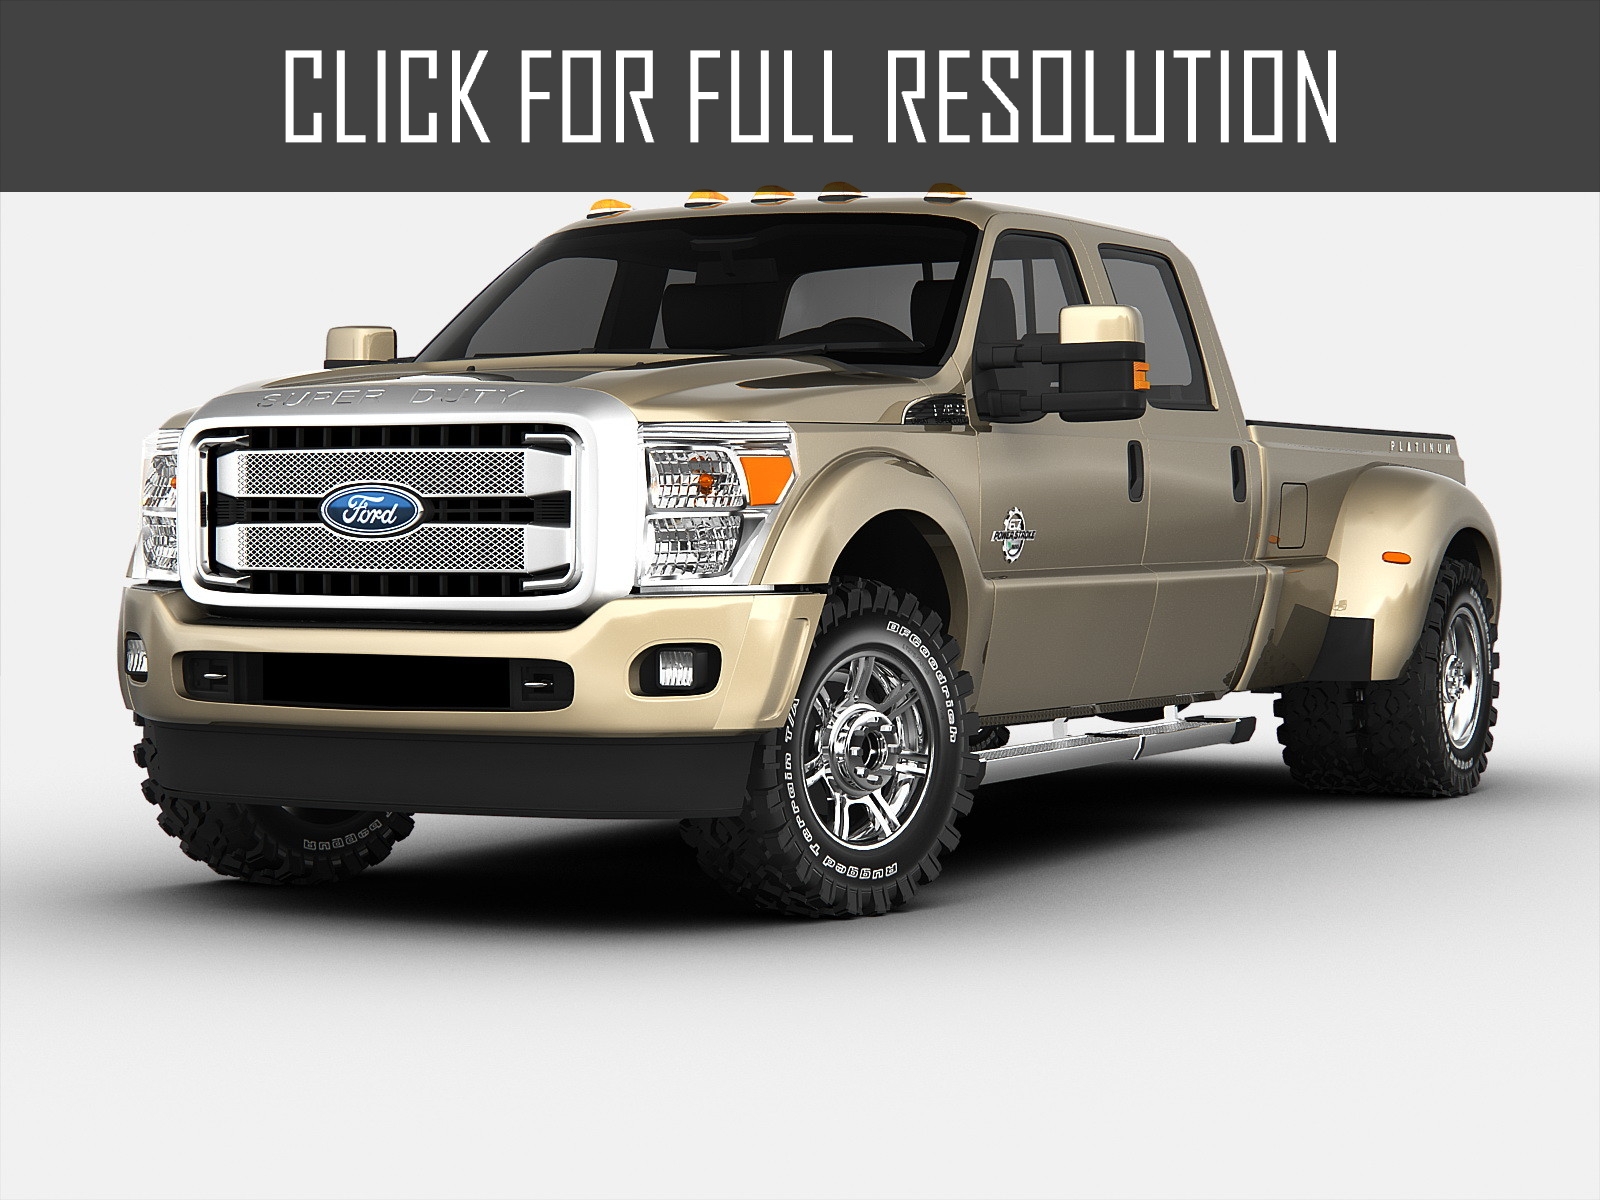 Ford Super Duty Redesign 2016